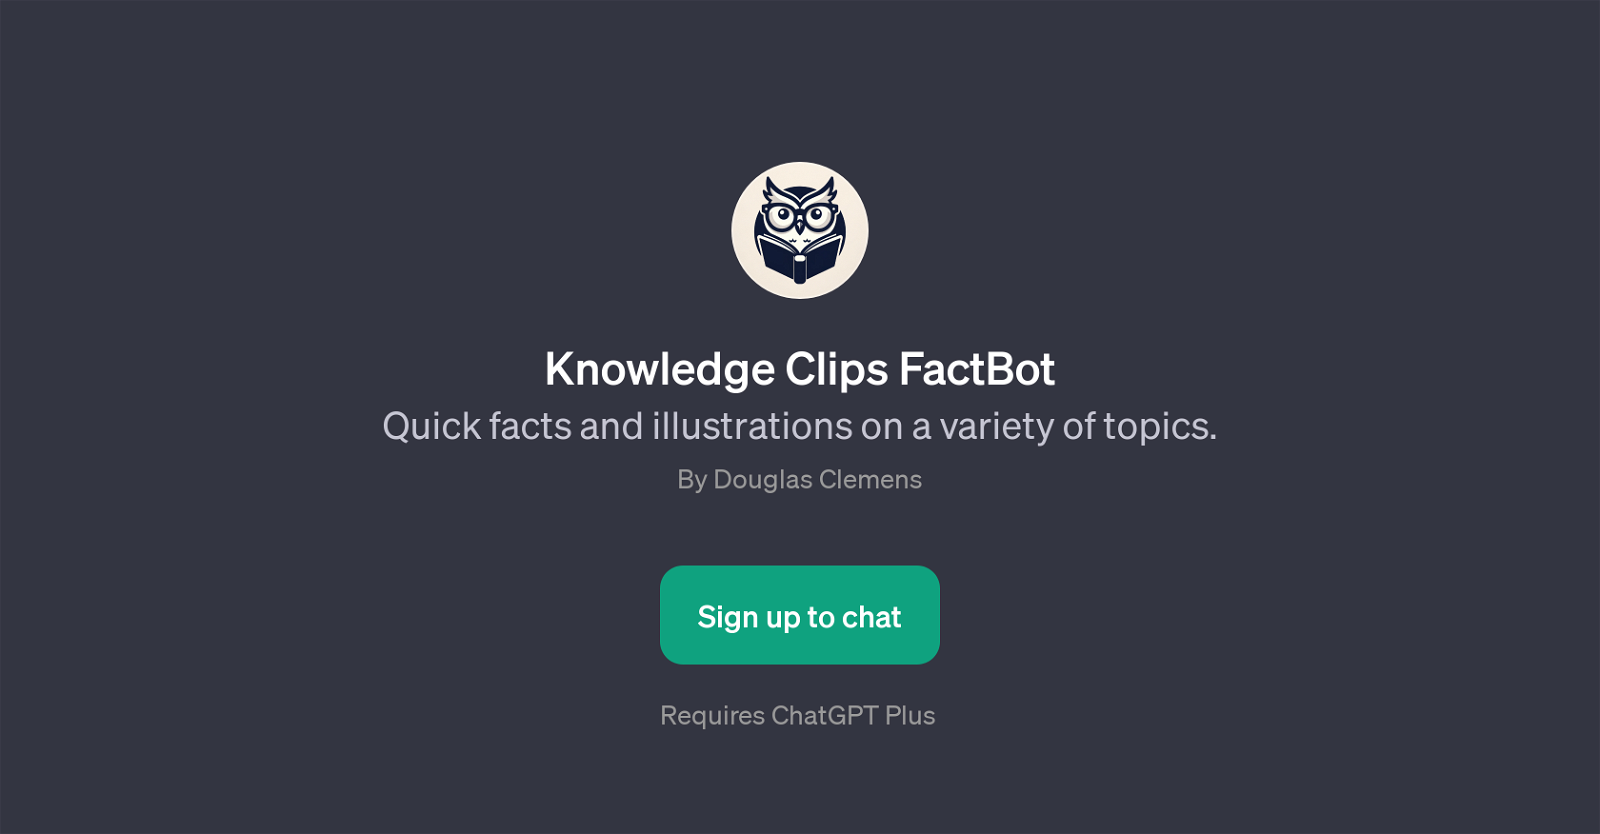 Knowledge Clips FactBot website